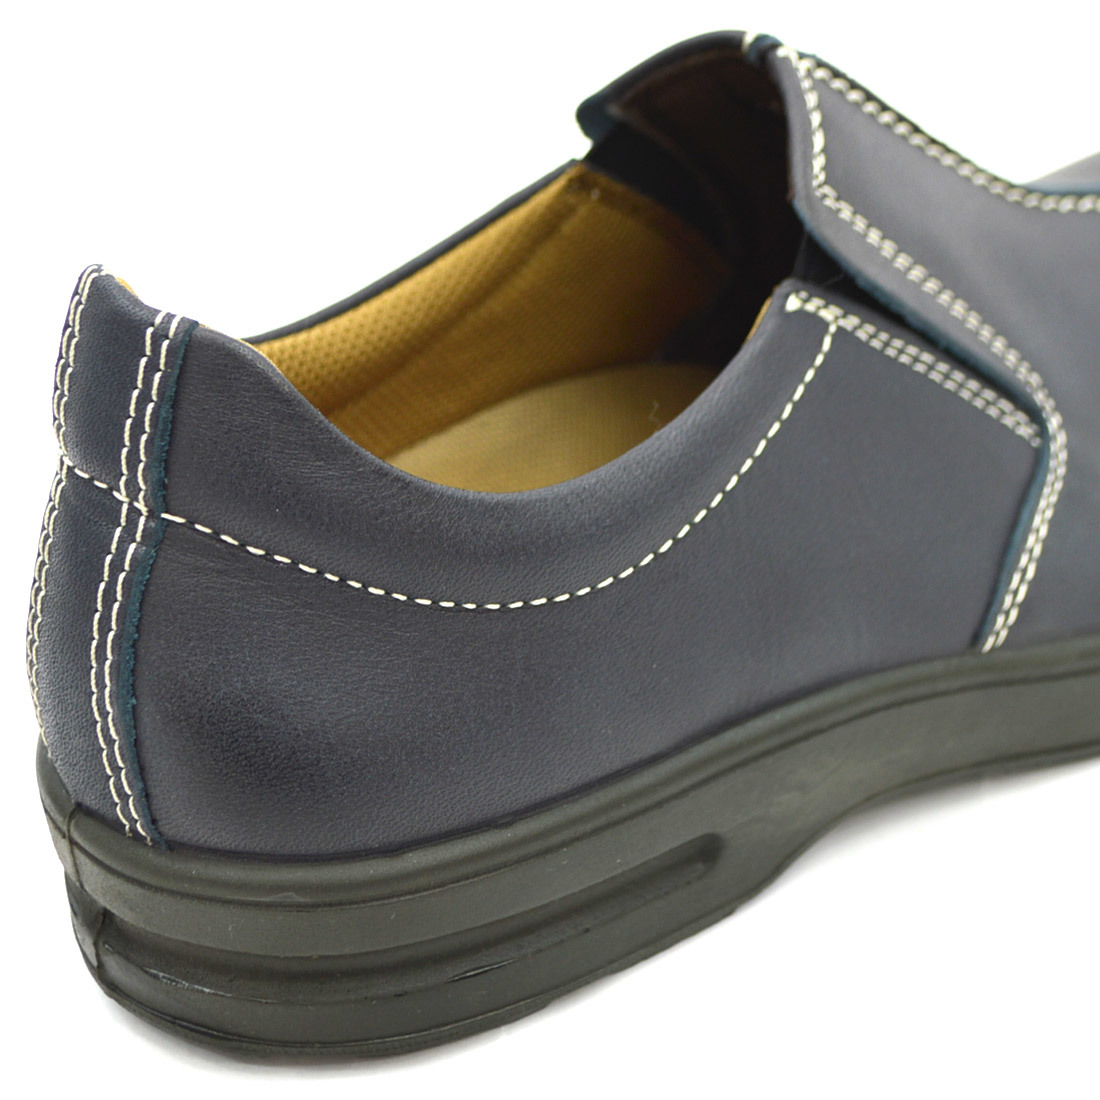 ^BOBSON Bobson casual shoes walking slip-on shoes 4509 original leather made in Japan navy Navy navy blue 25.5cm (0910010564-na-s255)